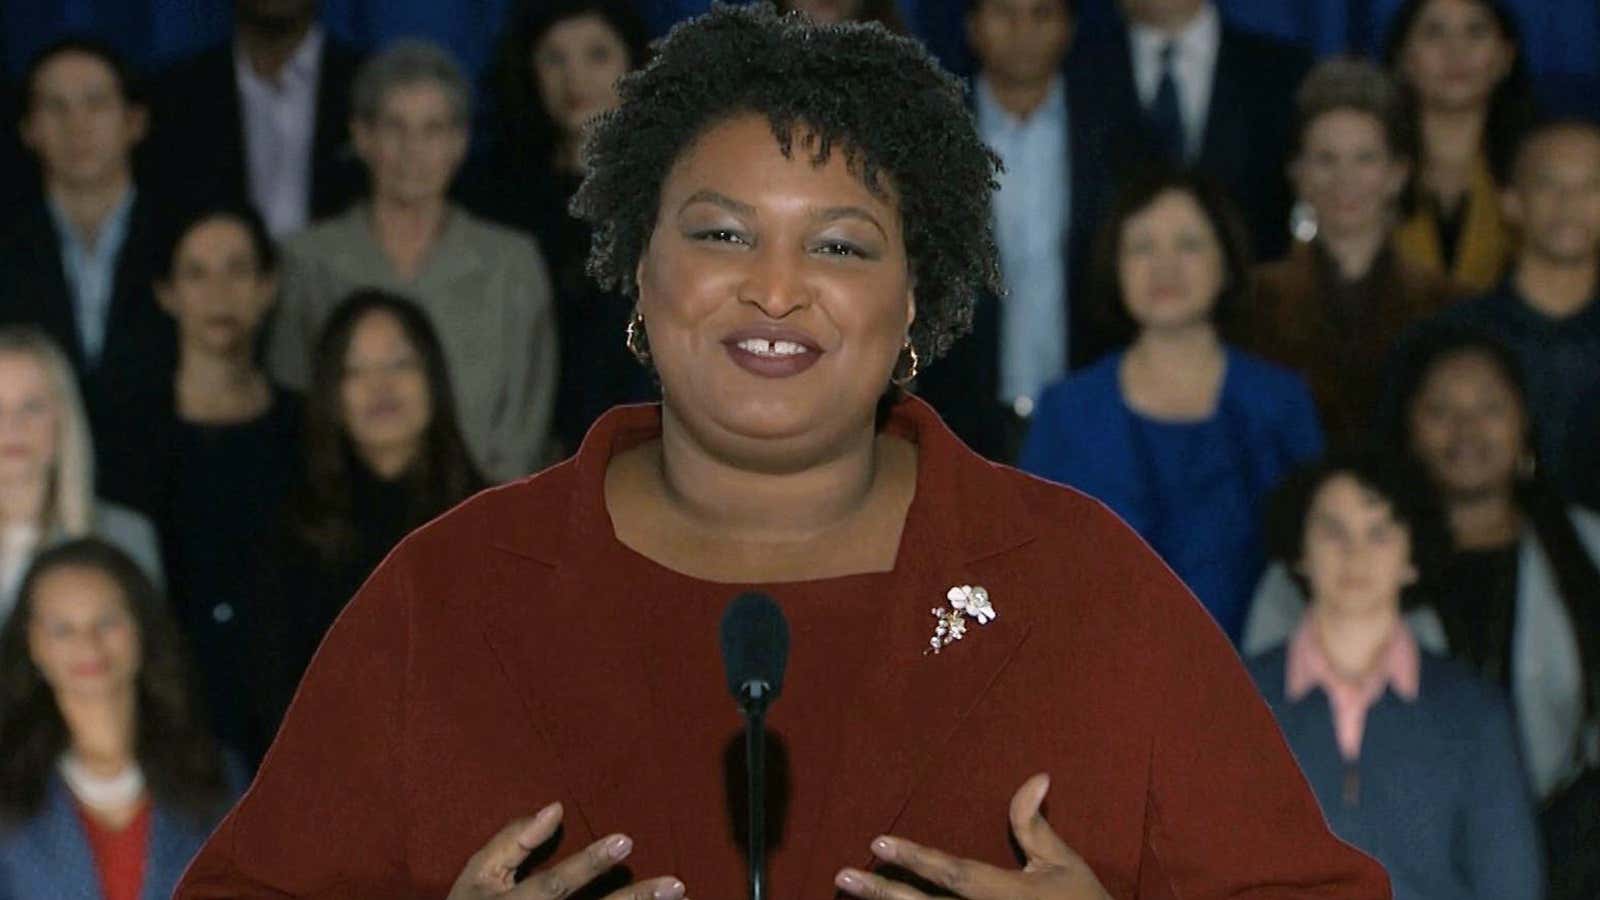 Stacey Abrams was both civil and firm.